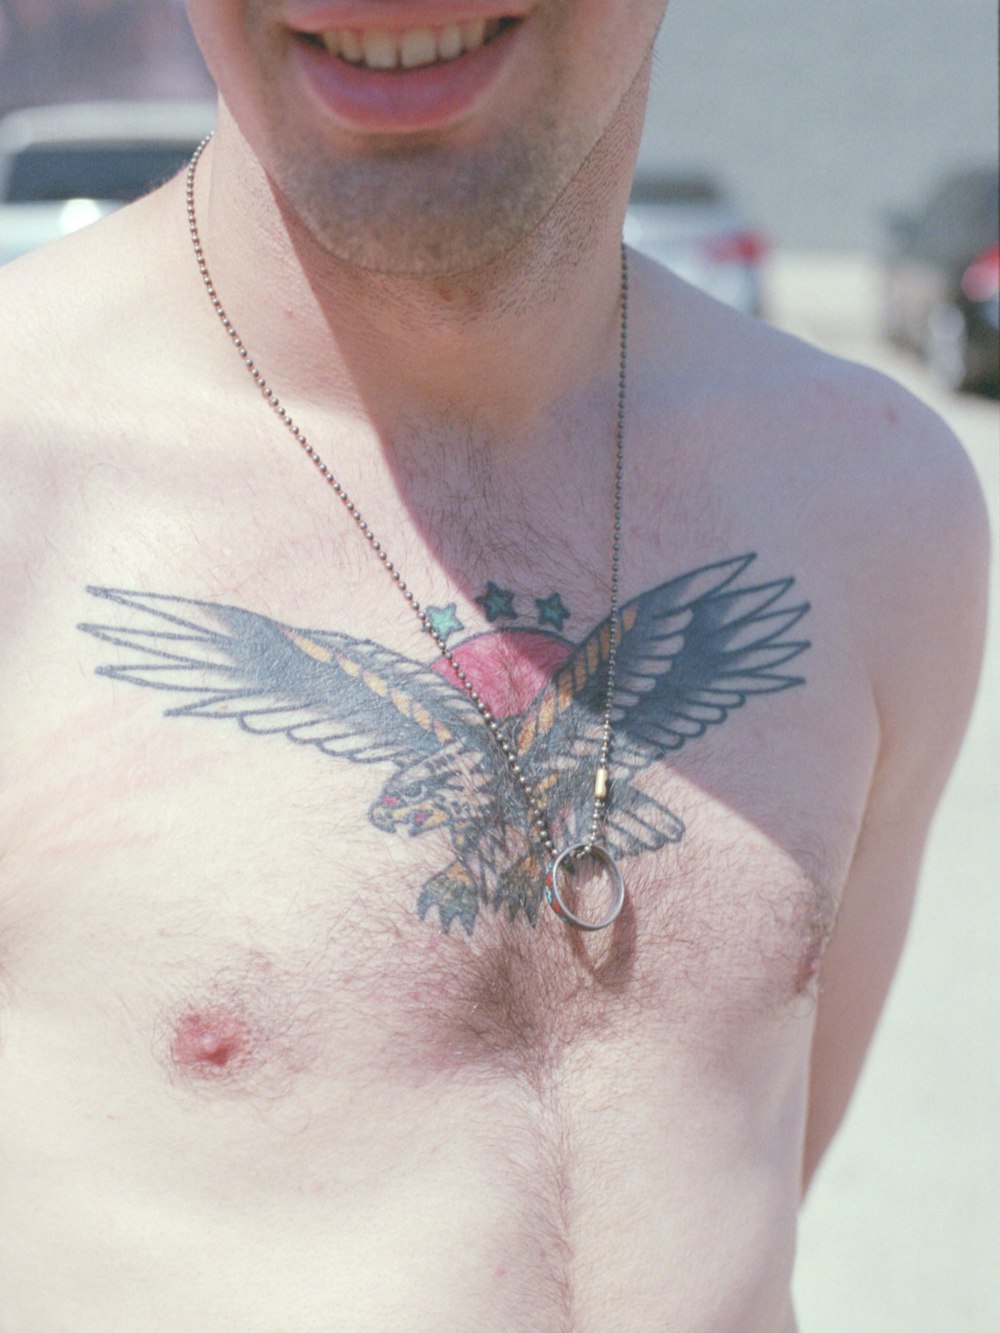 a man with a bird tattoo on his chest